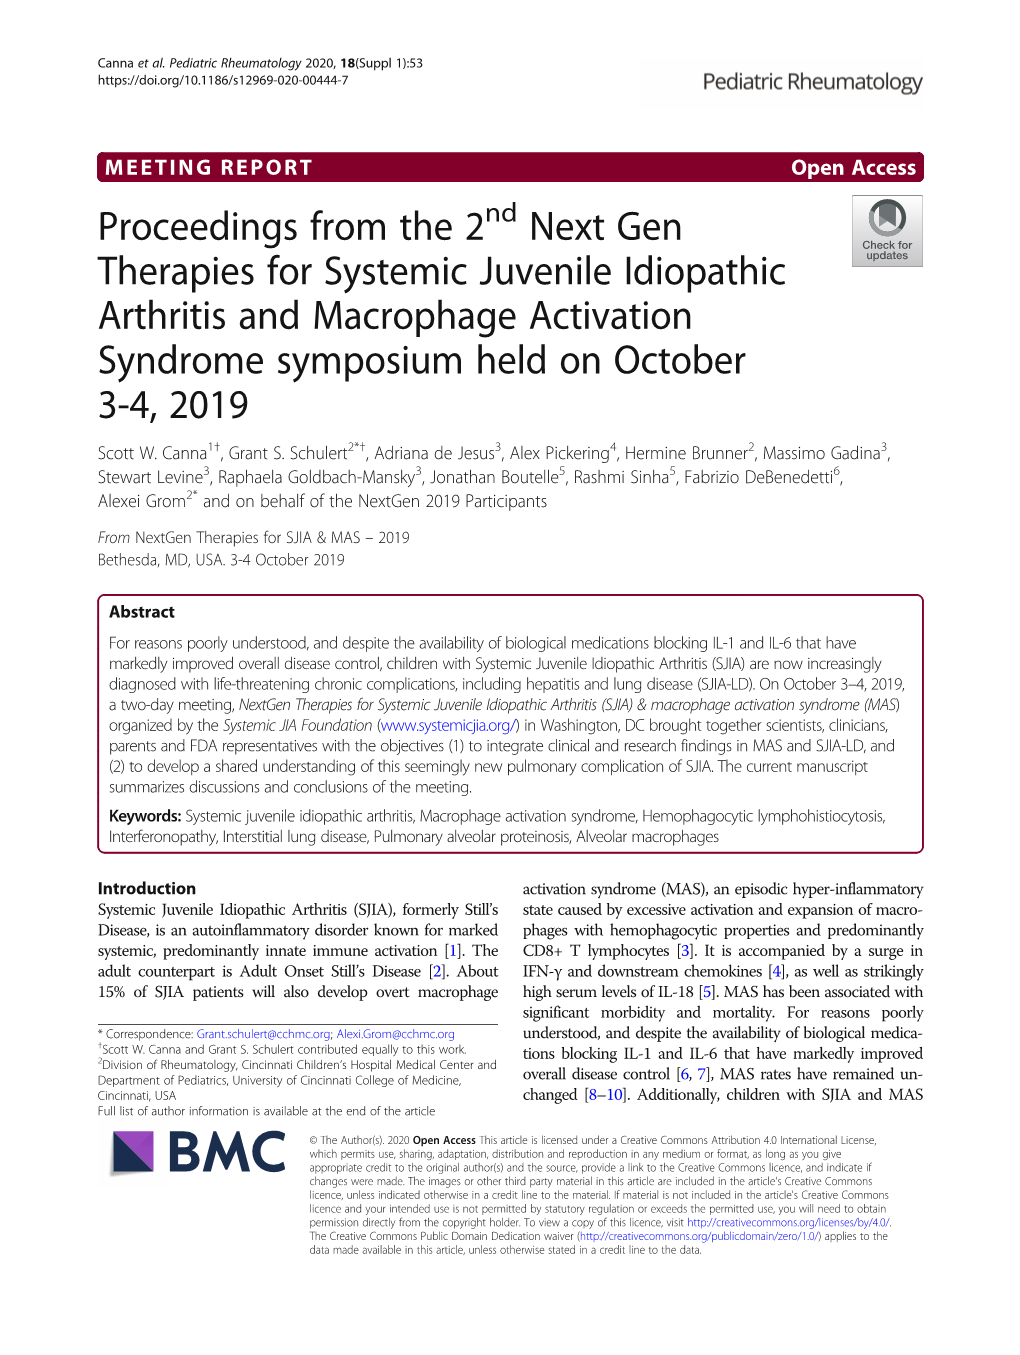 Proceedings from the 2Nd Next Gen Therapies for Systemic Juvenile Idiopathic Arthritis and Macrophage Activation Syndrome Symposium Held on October 3-4, 2019 Scott W